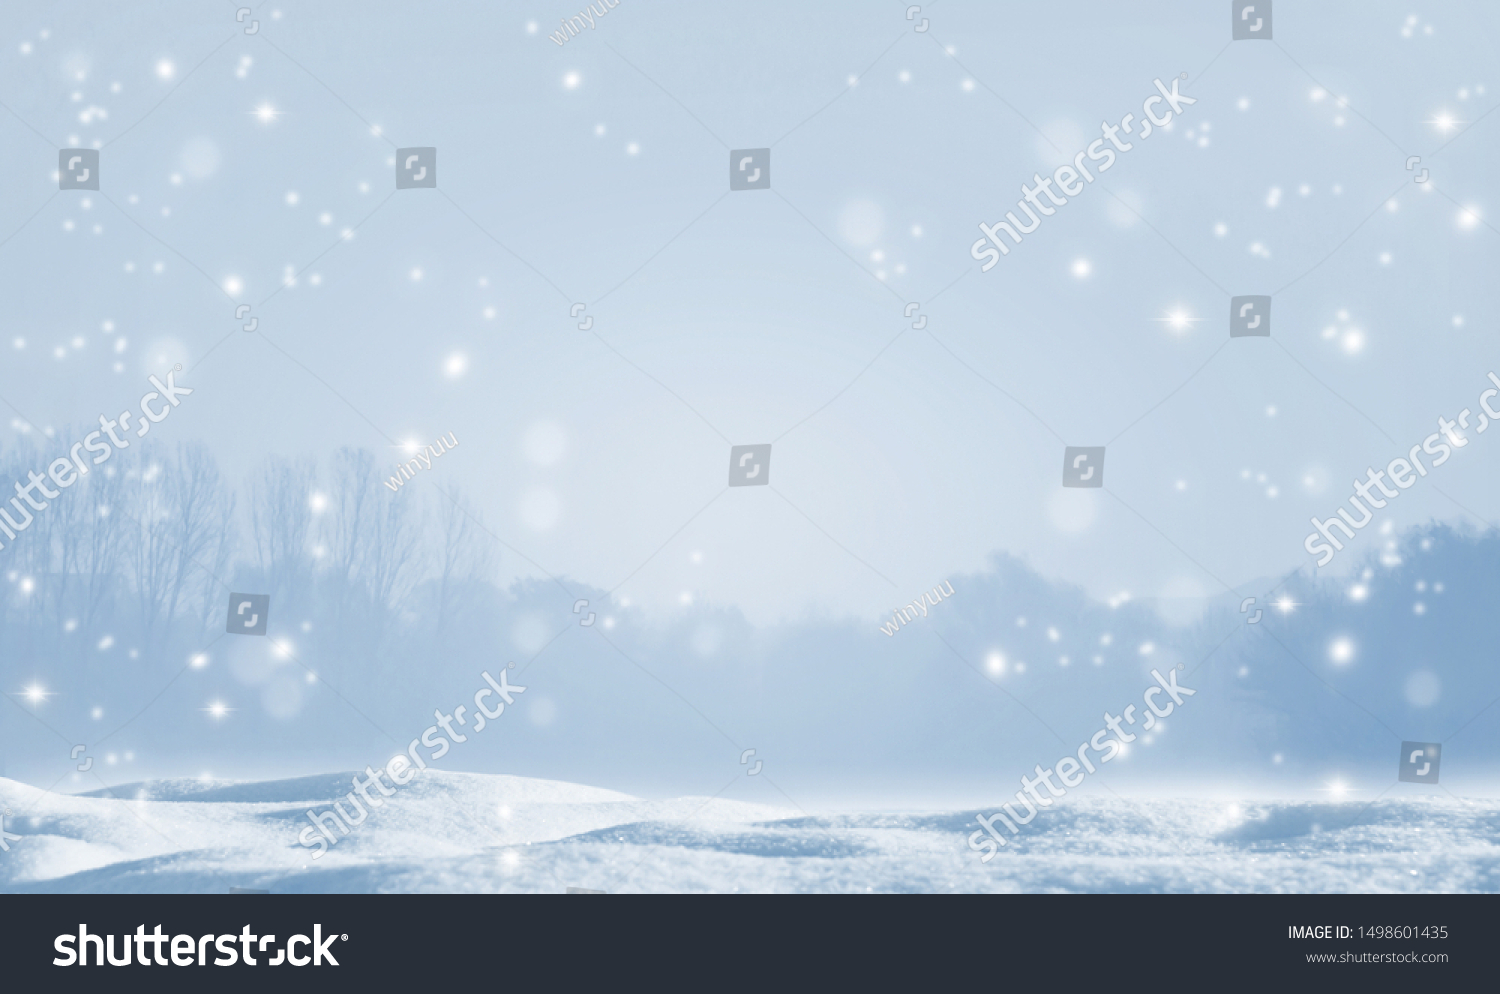 beautiful white empty winter idyll, shiny snowflakes on blurred winter landscape, christmas background with advertising space on snow cover, holiday season backdrop #1498601435